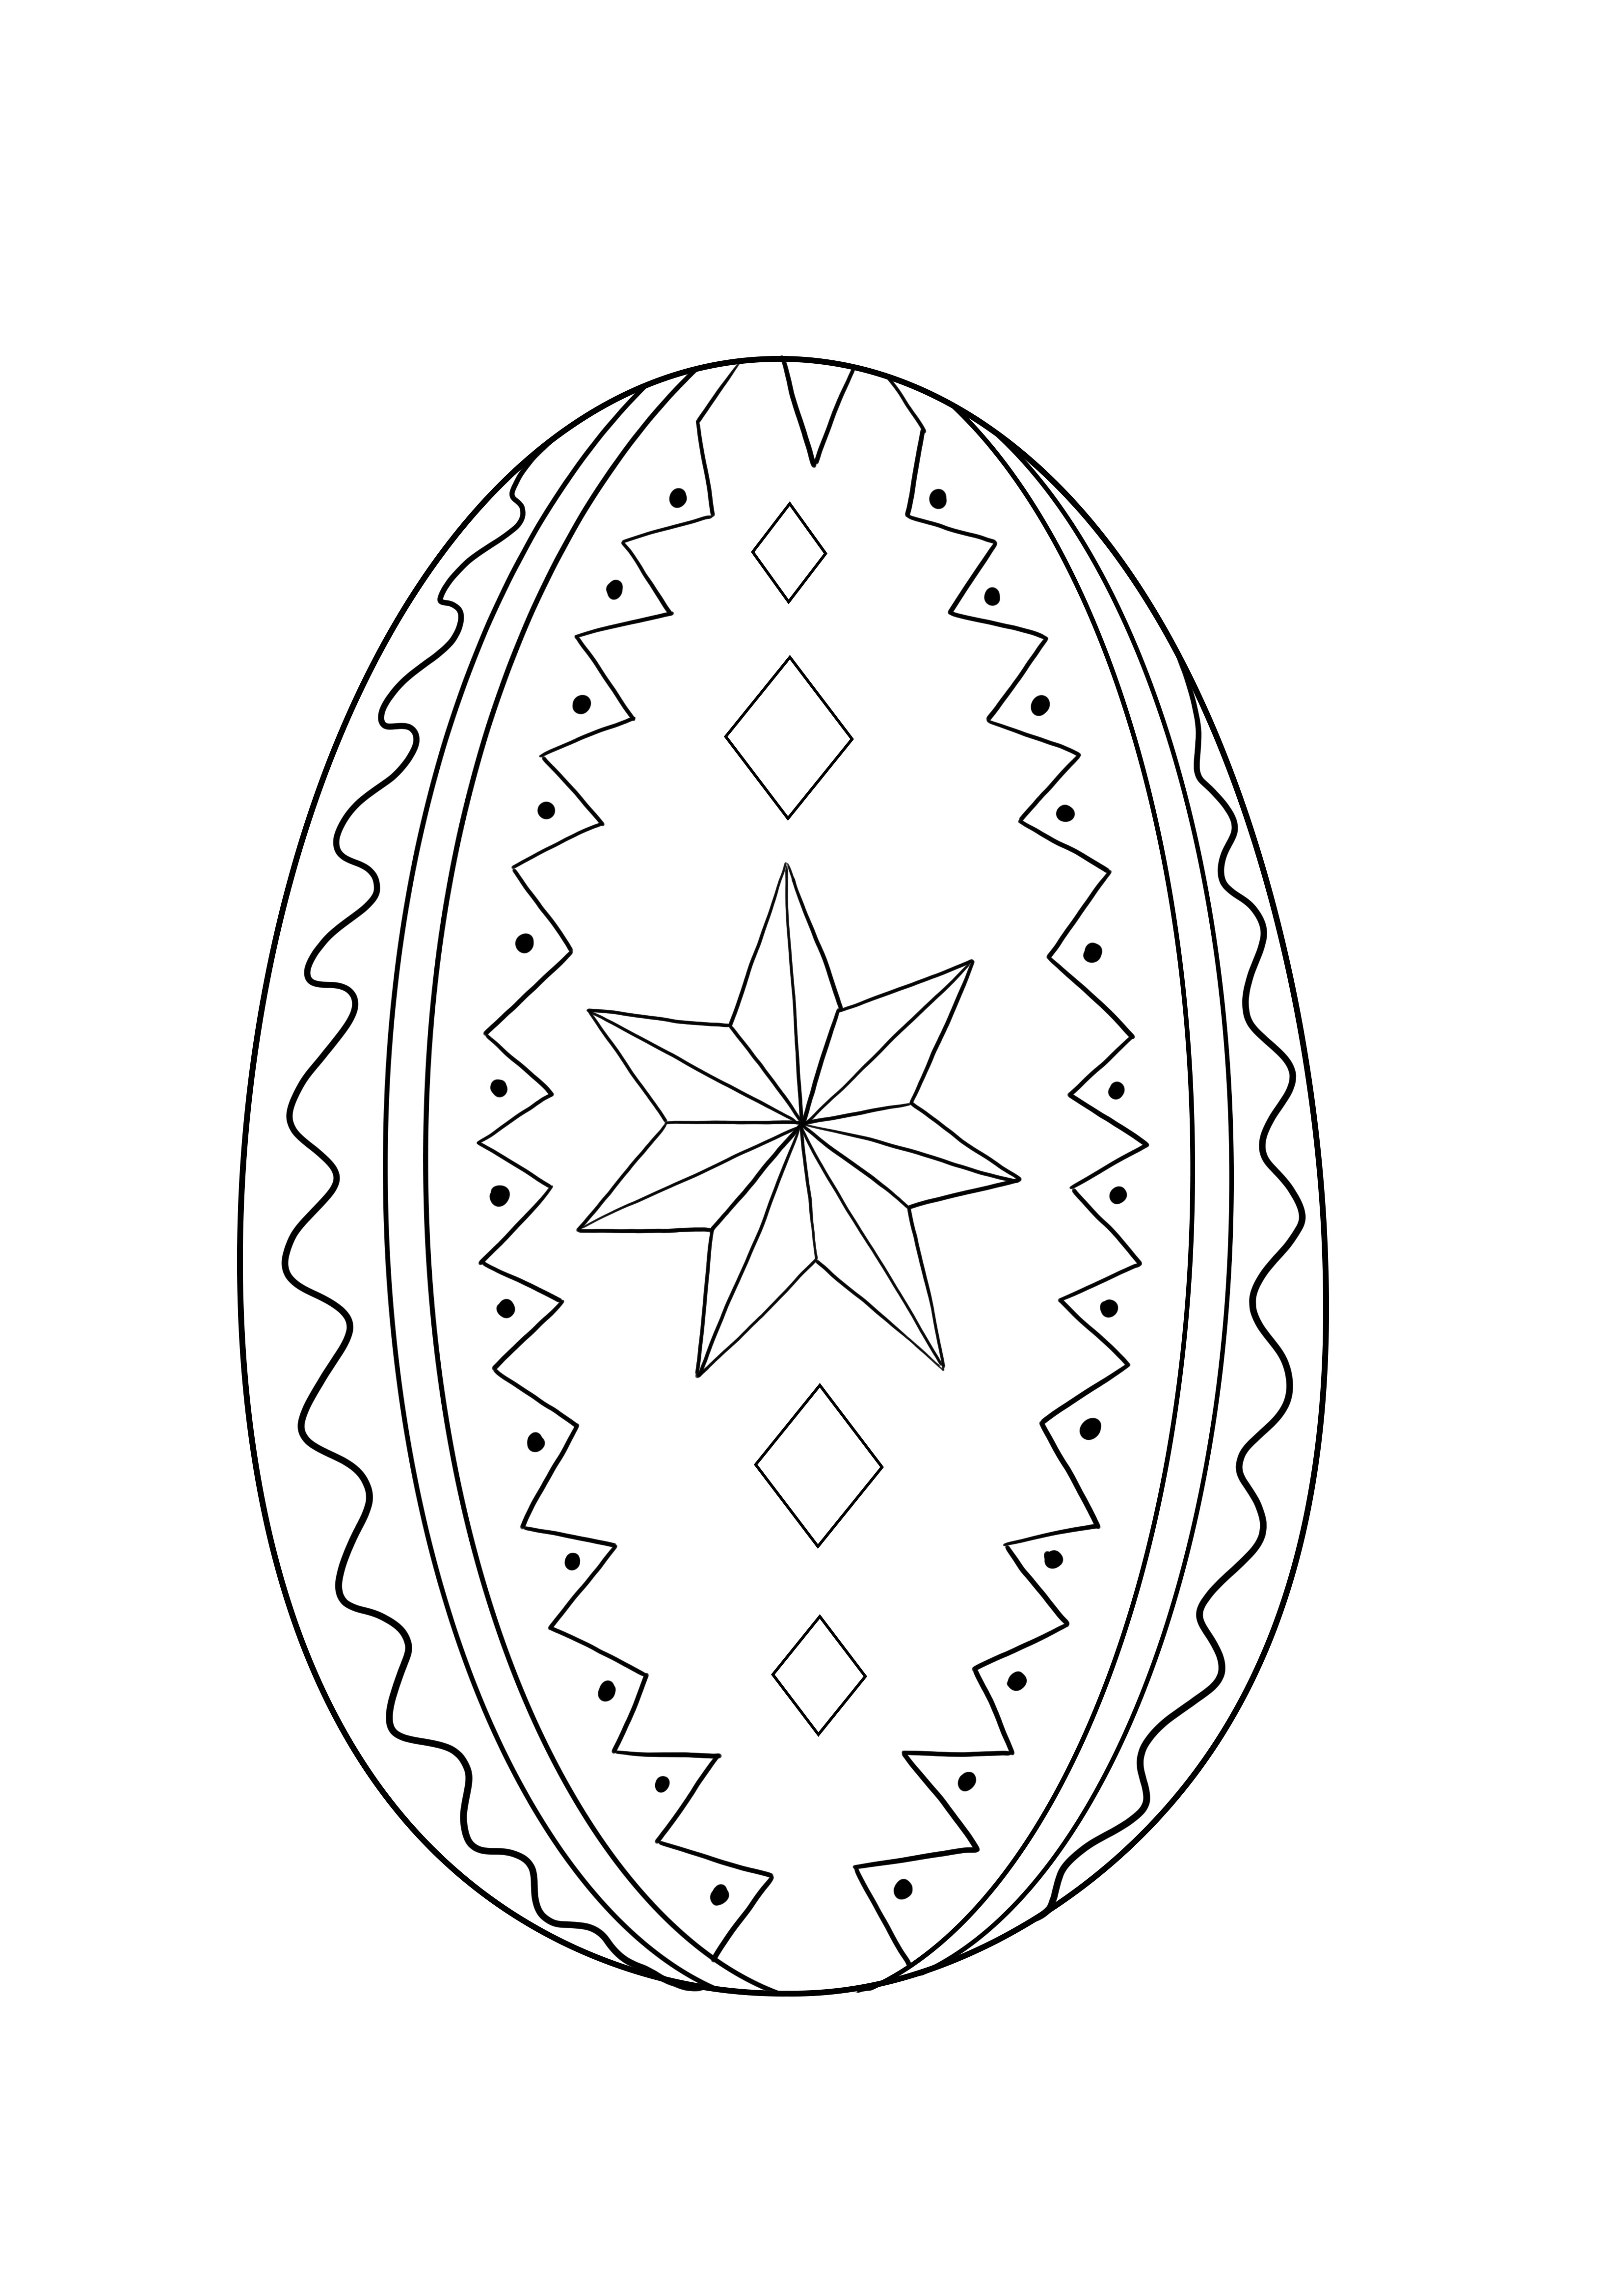 Easter decorated egg picture to print-free and color